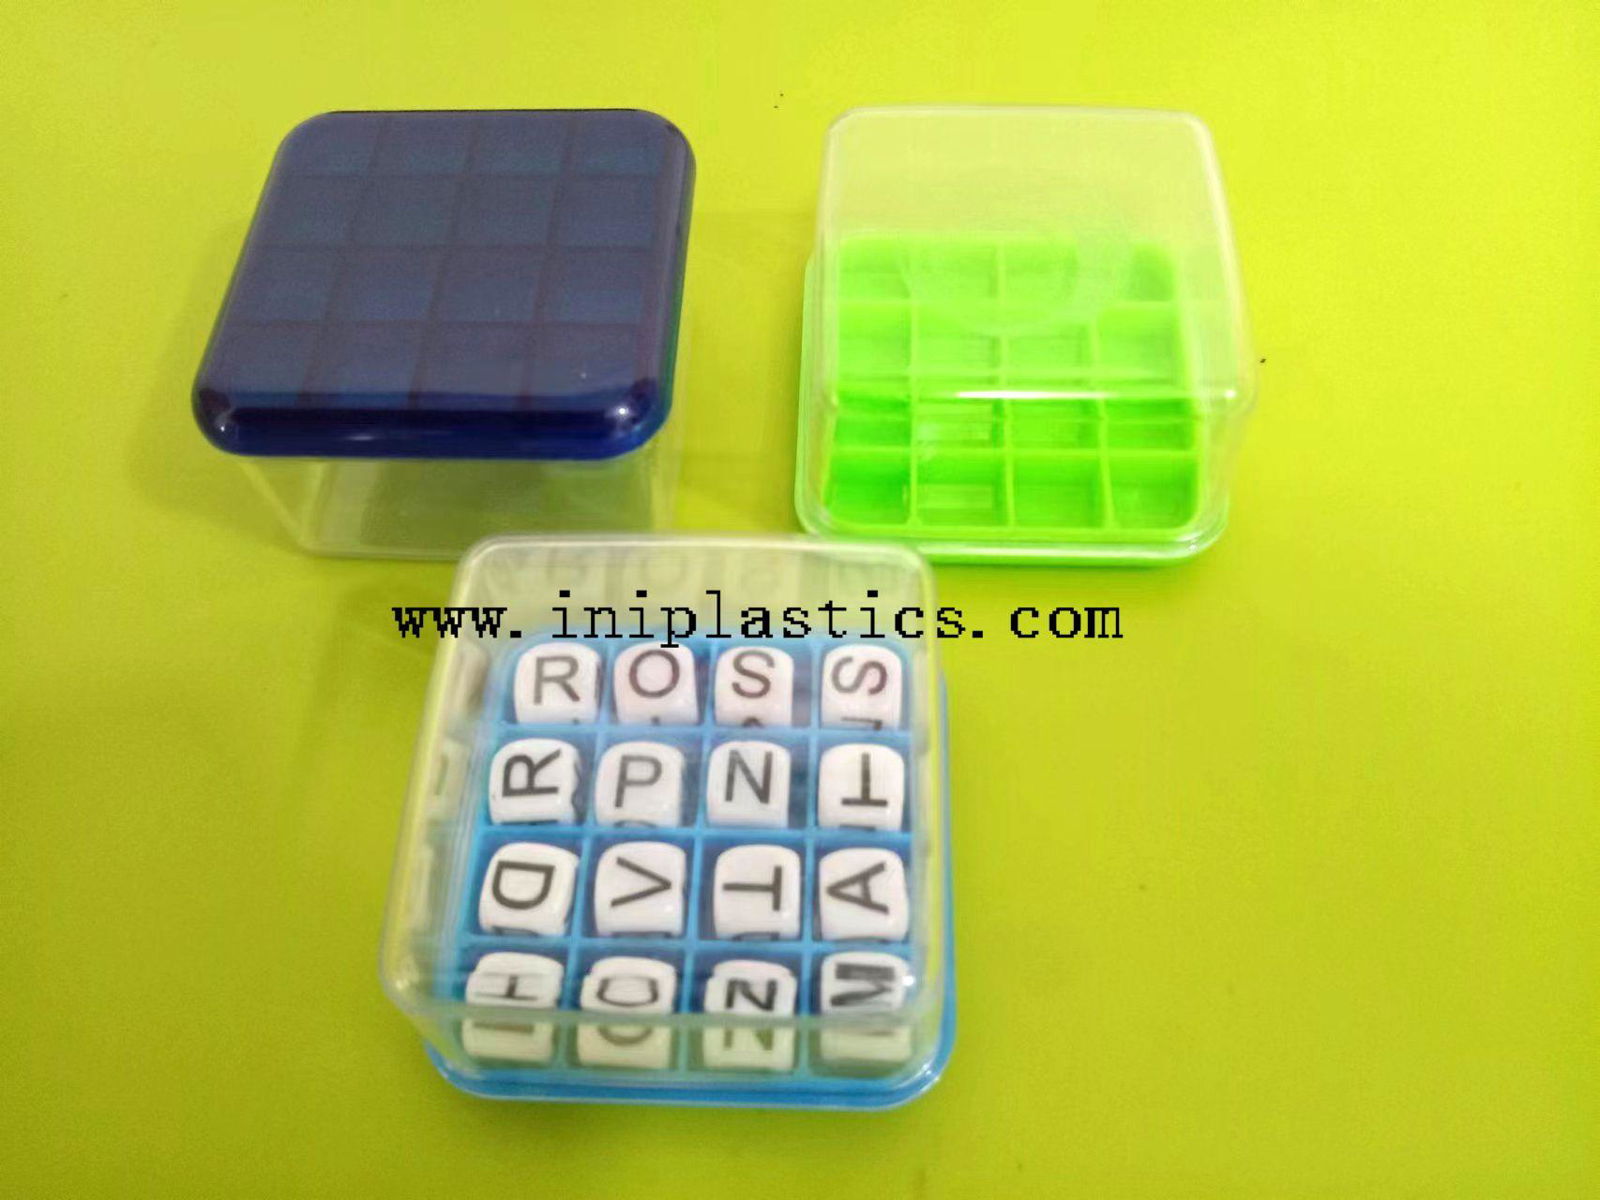 Boggle letter die English letter dice letter cubes spelling bee words seraching